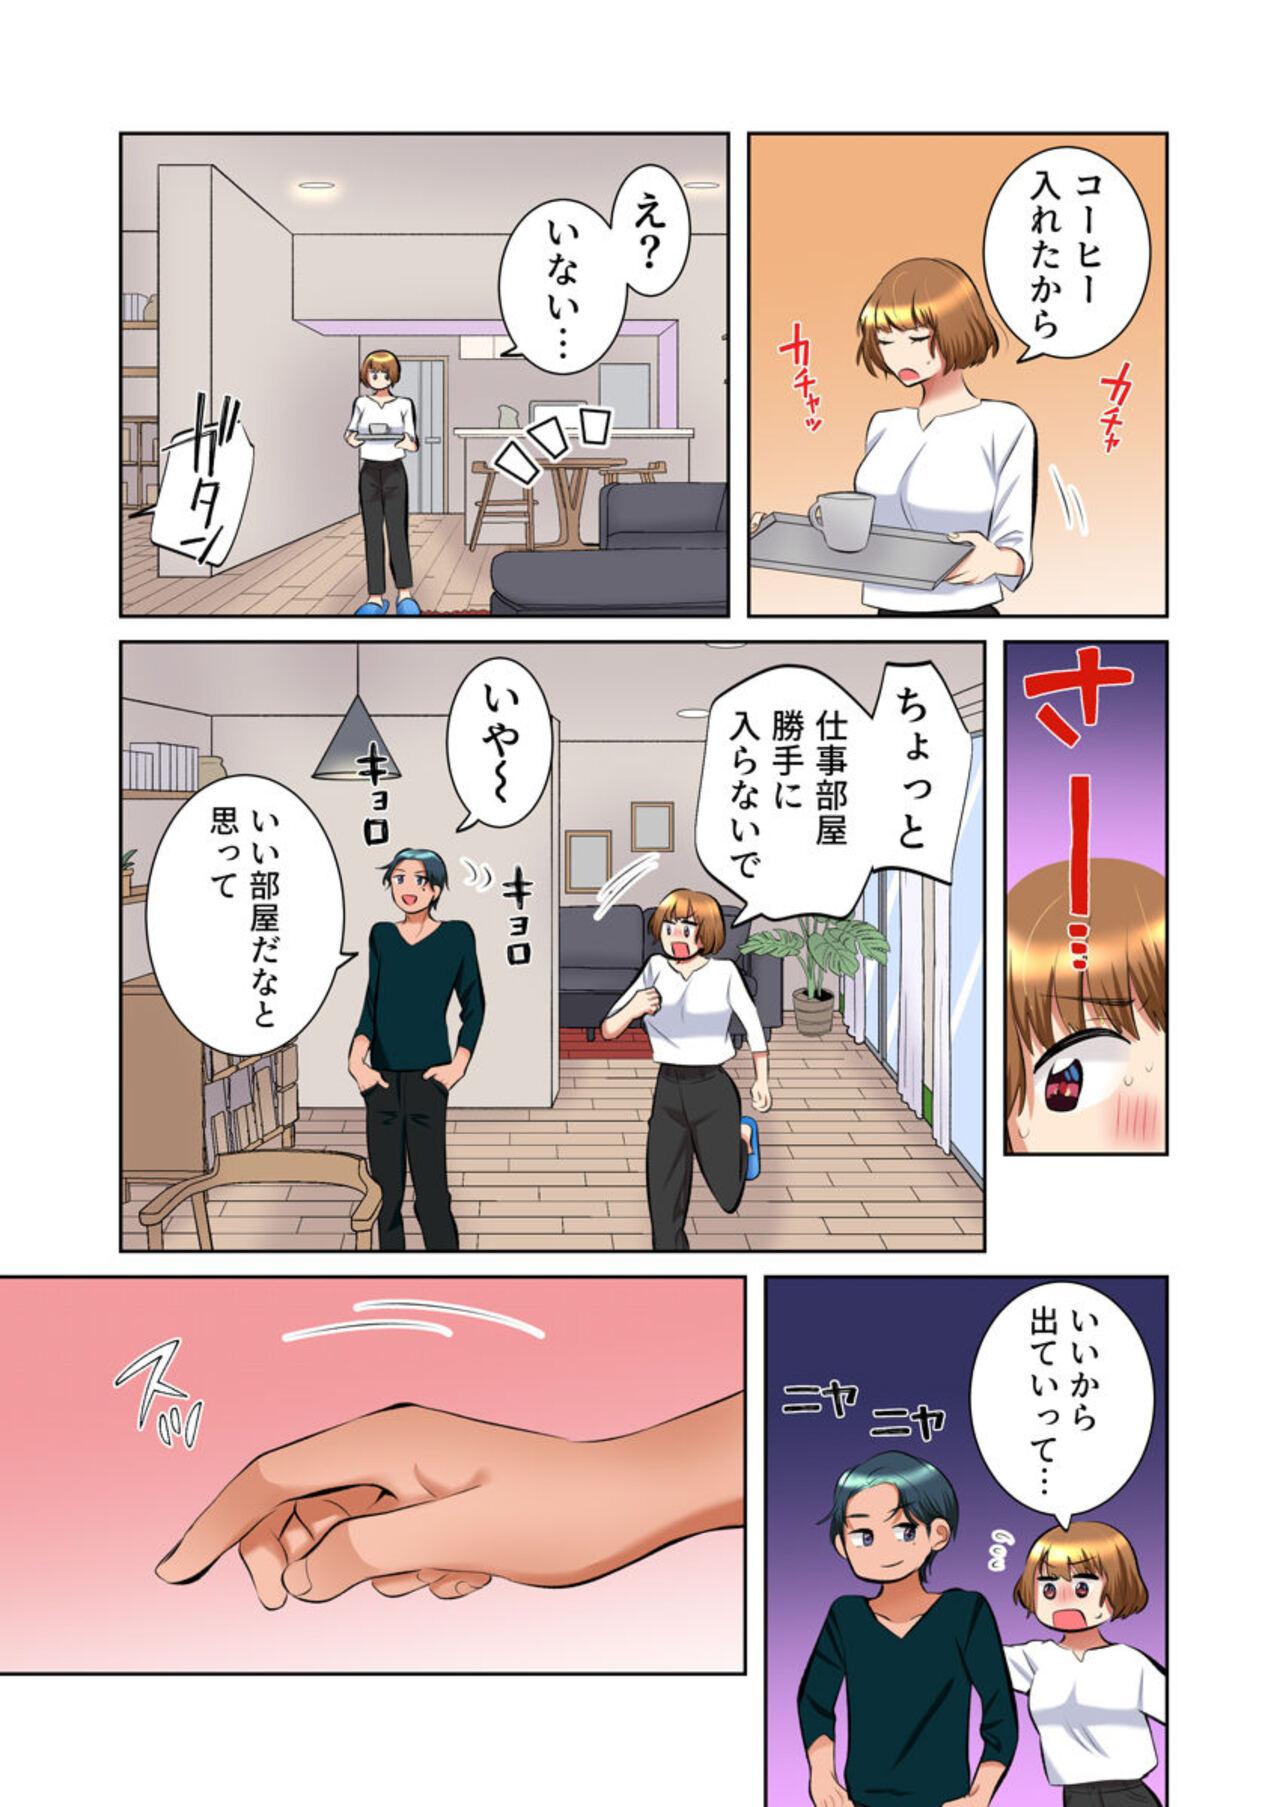 [Ika Hotaru] My Neighbor Is A Sadistic Ex-Boyfriend ~I Love My Husband, But My Aching Body Has Been Redeveloped~ (Full Color) 2 18